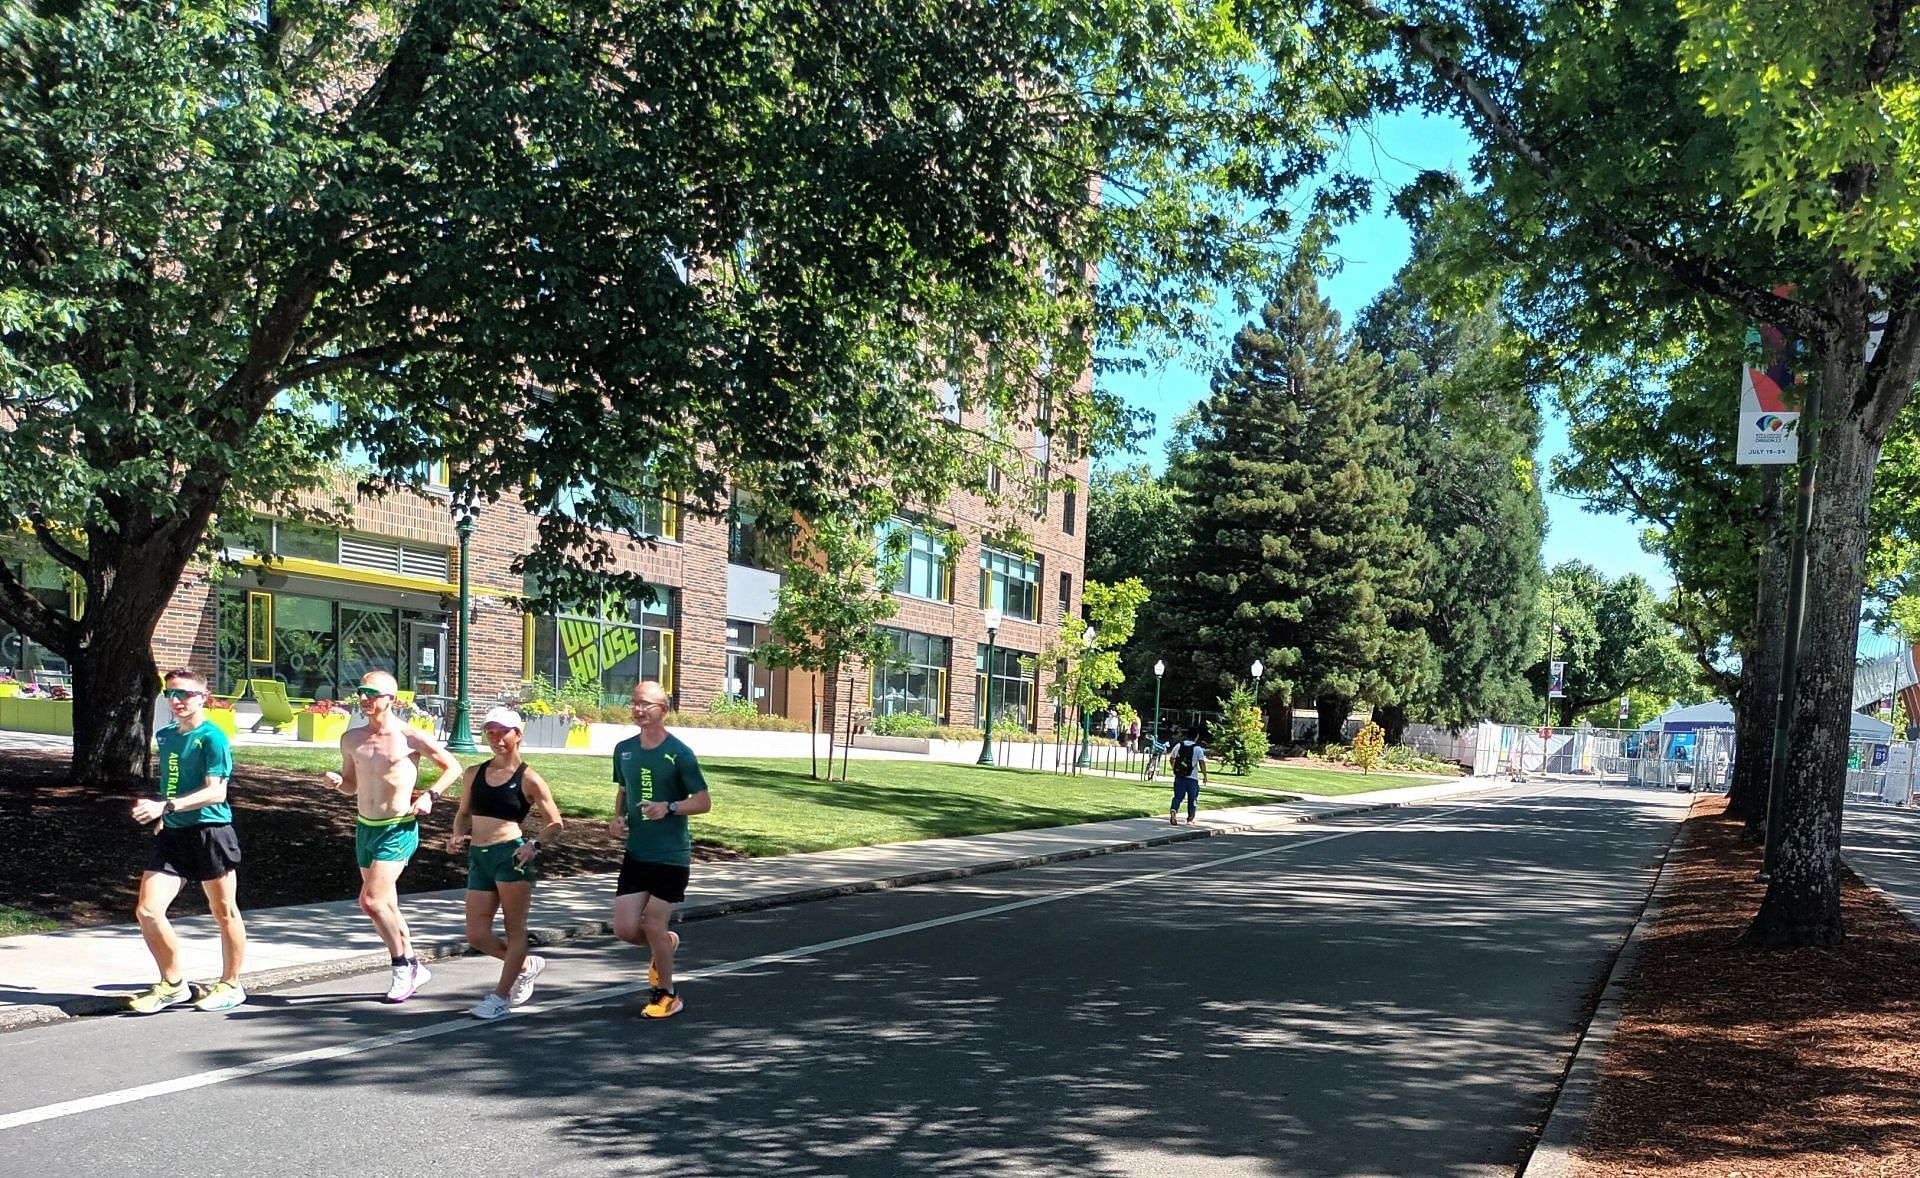 Australian race walkers during a training session in Eugene. (Pic. credit: Navneet Singh)